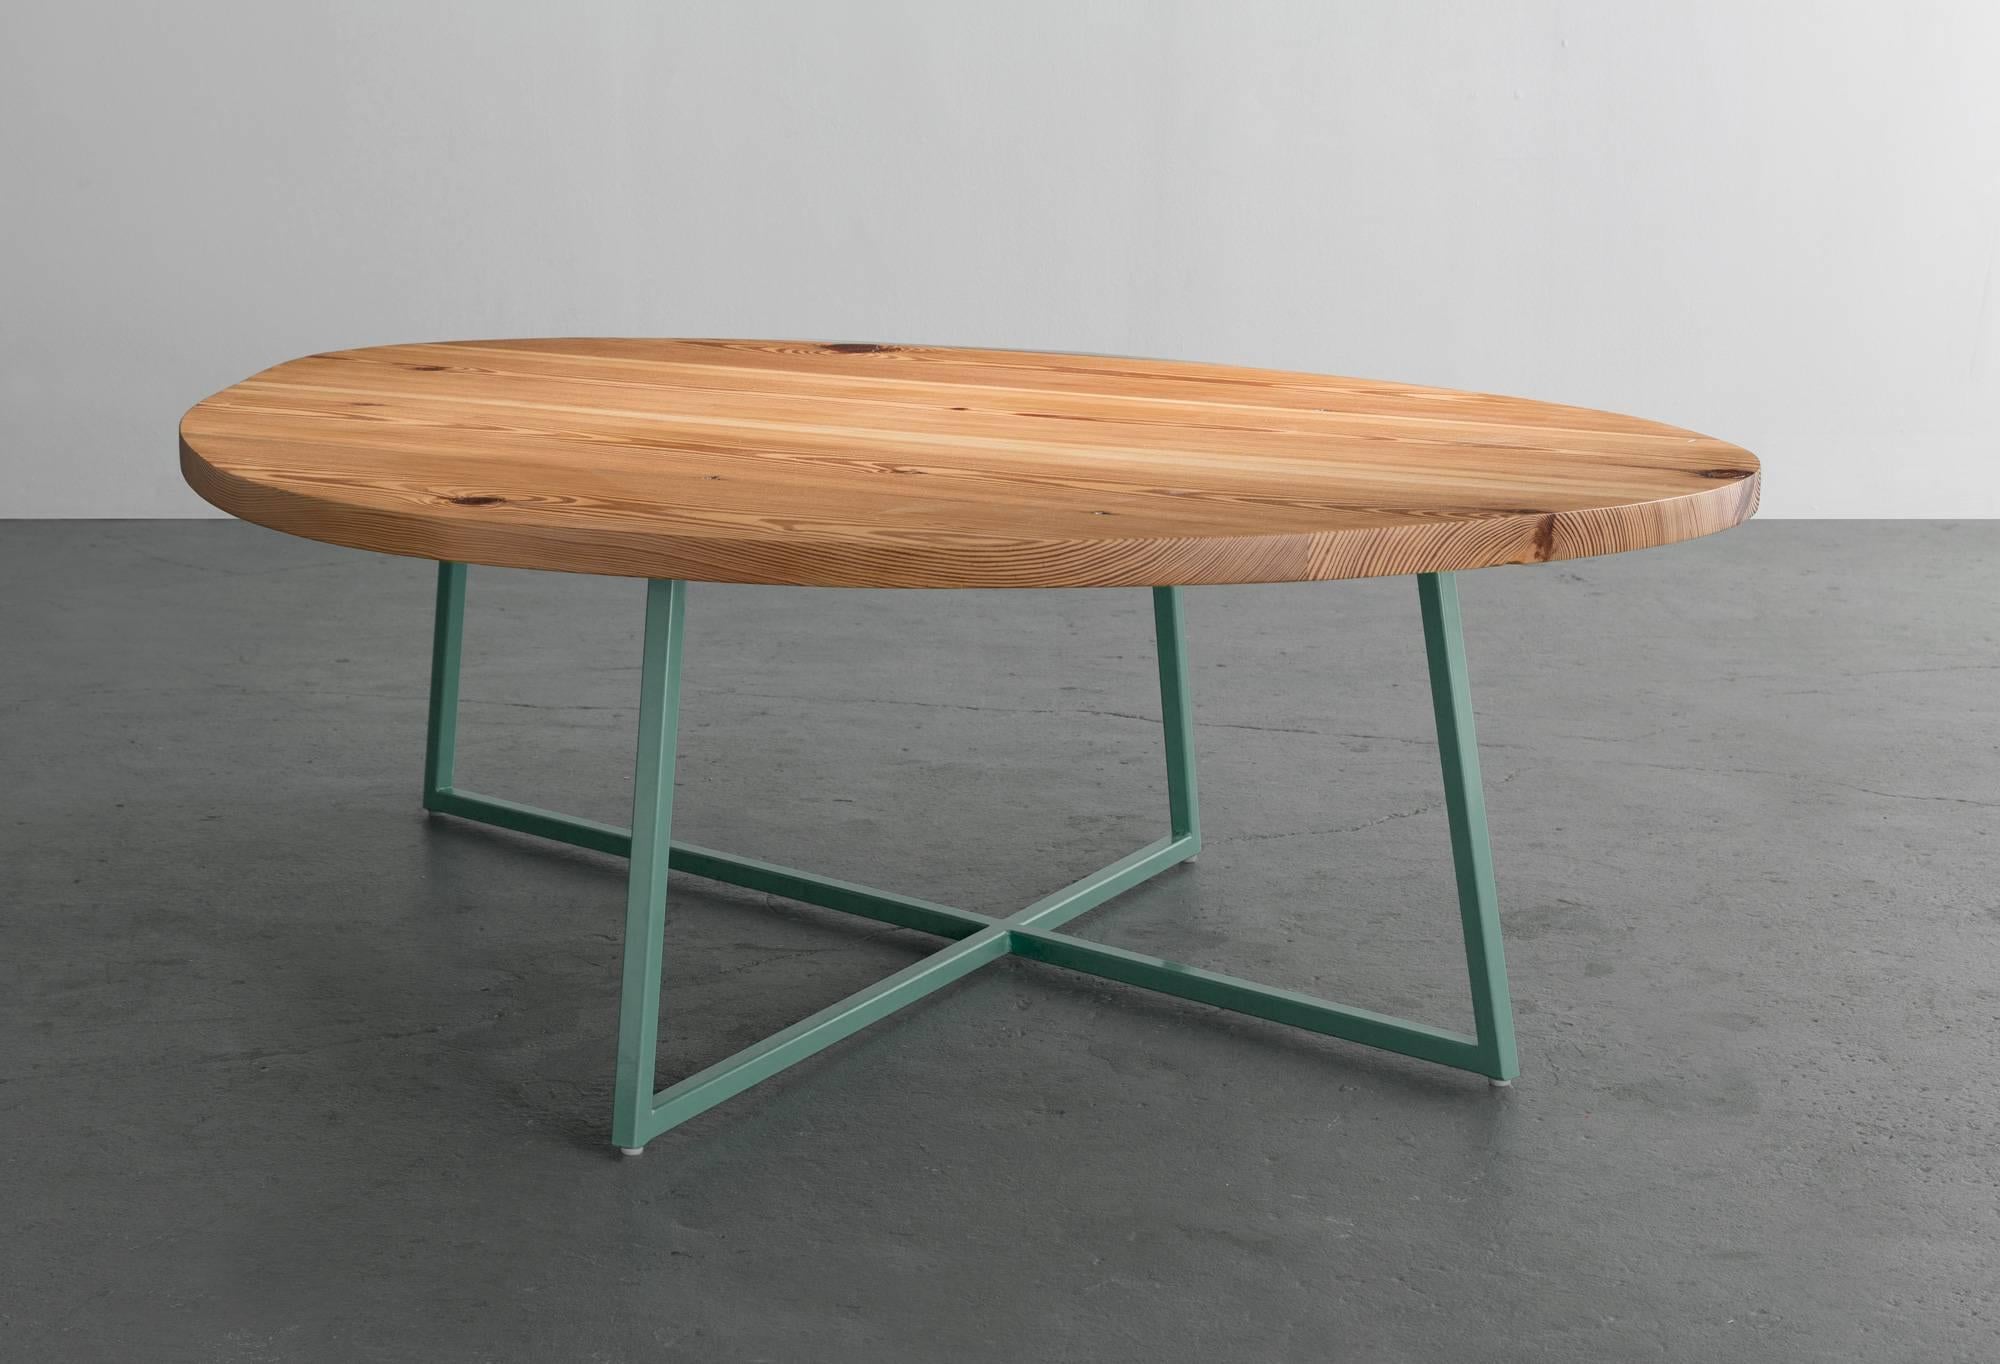 The Noguchoff coffee table is a casual and playful rendition of an iconic table through new line, surface, and color.

Shown in reclaimed heart pine and available in ash, maple, walnut, or white oak. 
Frame shown in green powder coat and also